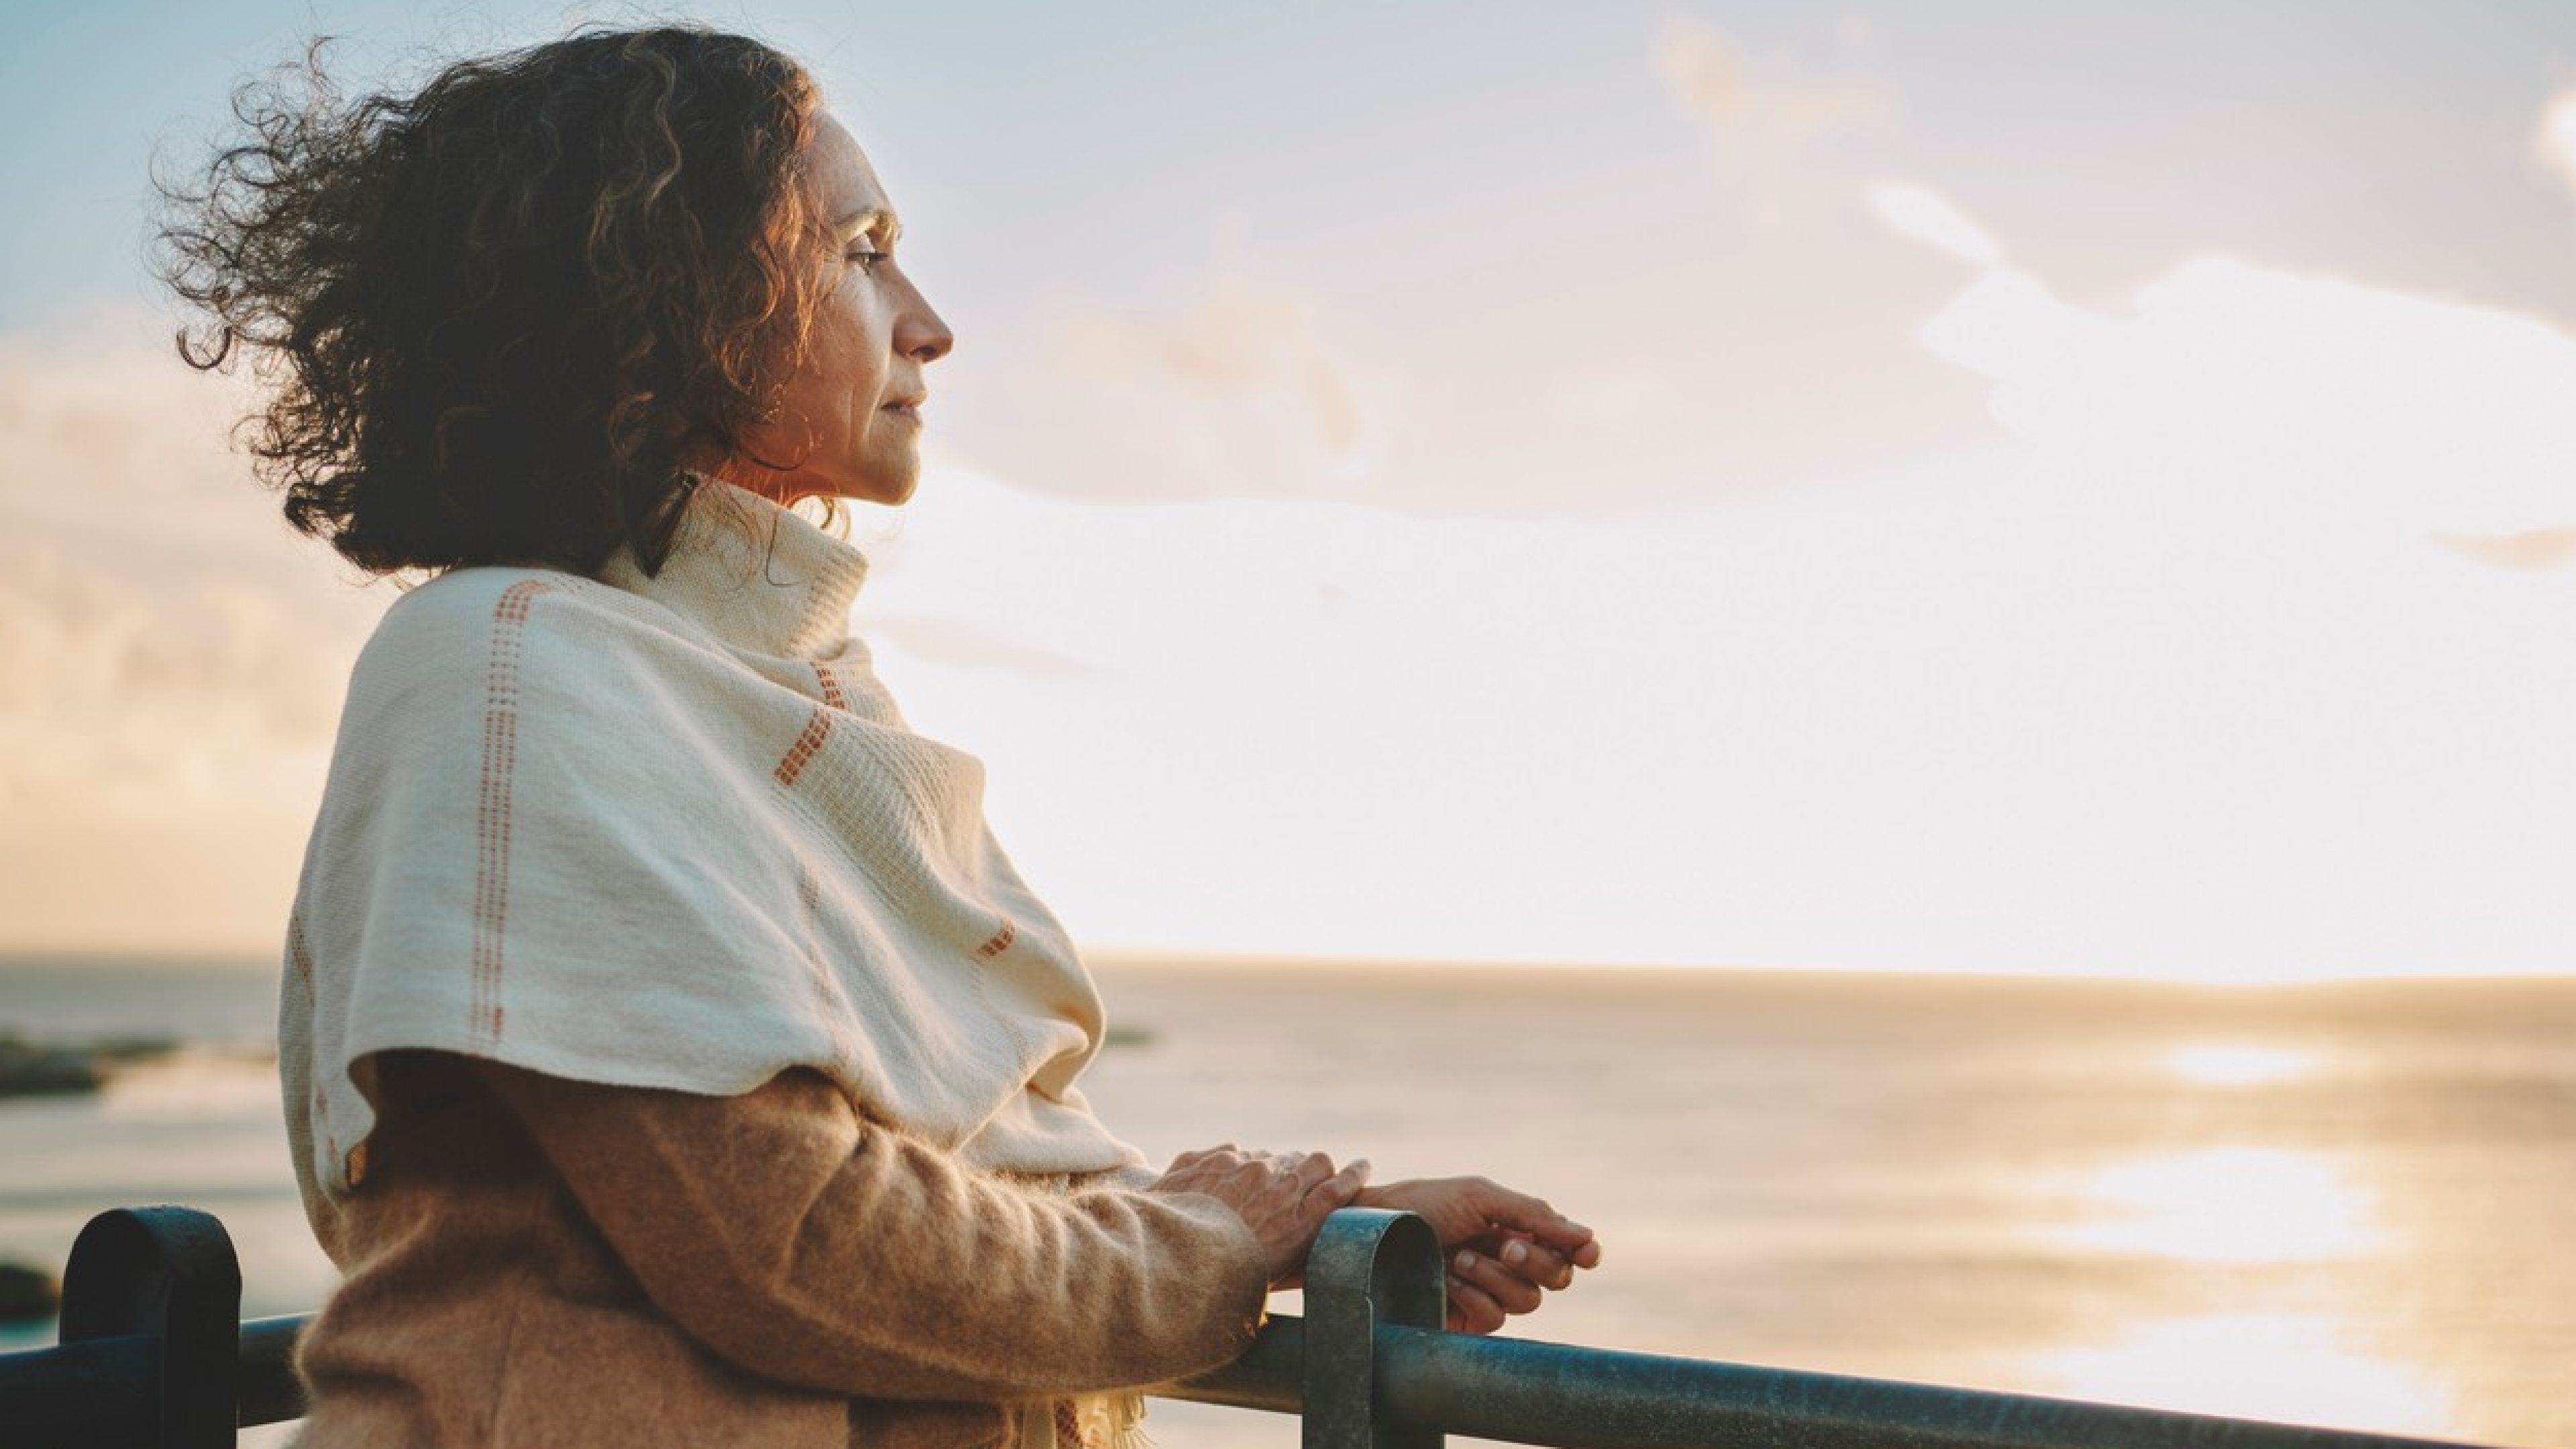 Mature woman wearing a pashmina leaning on a railing and looking out at the sunset over the ocean